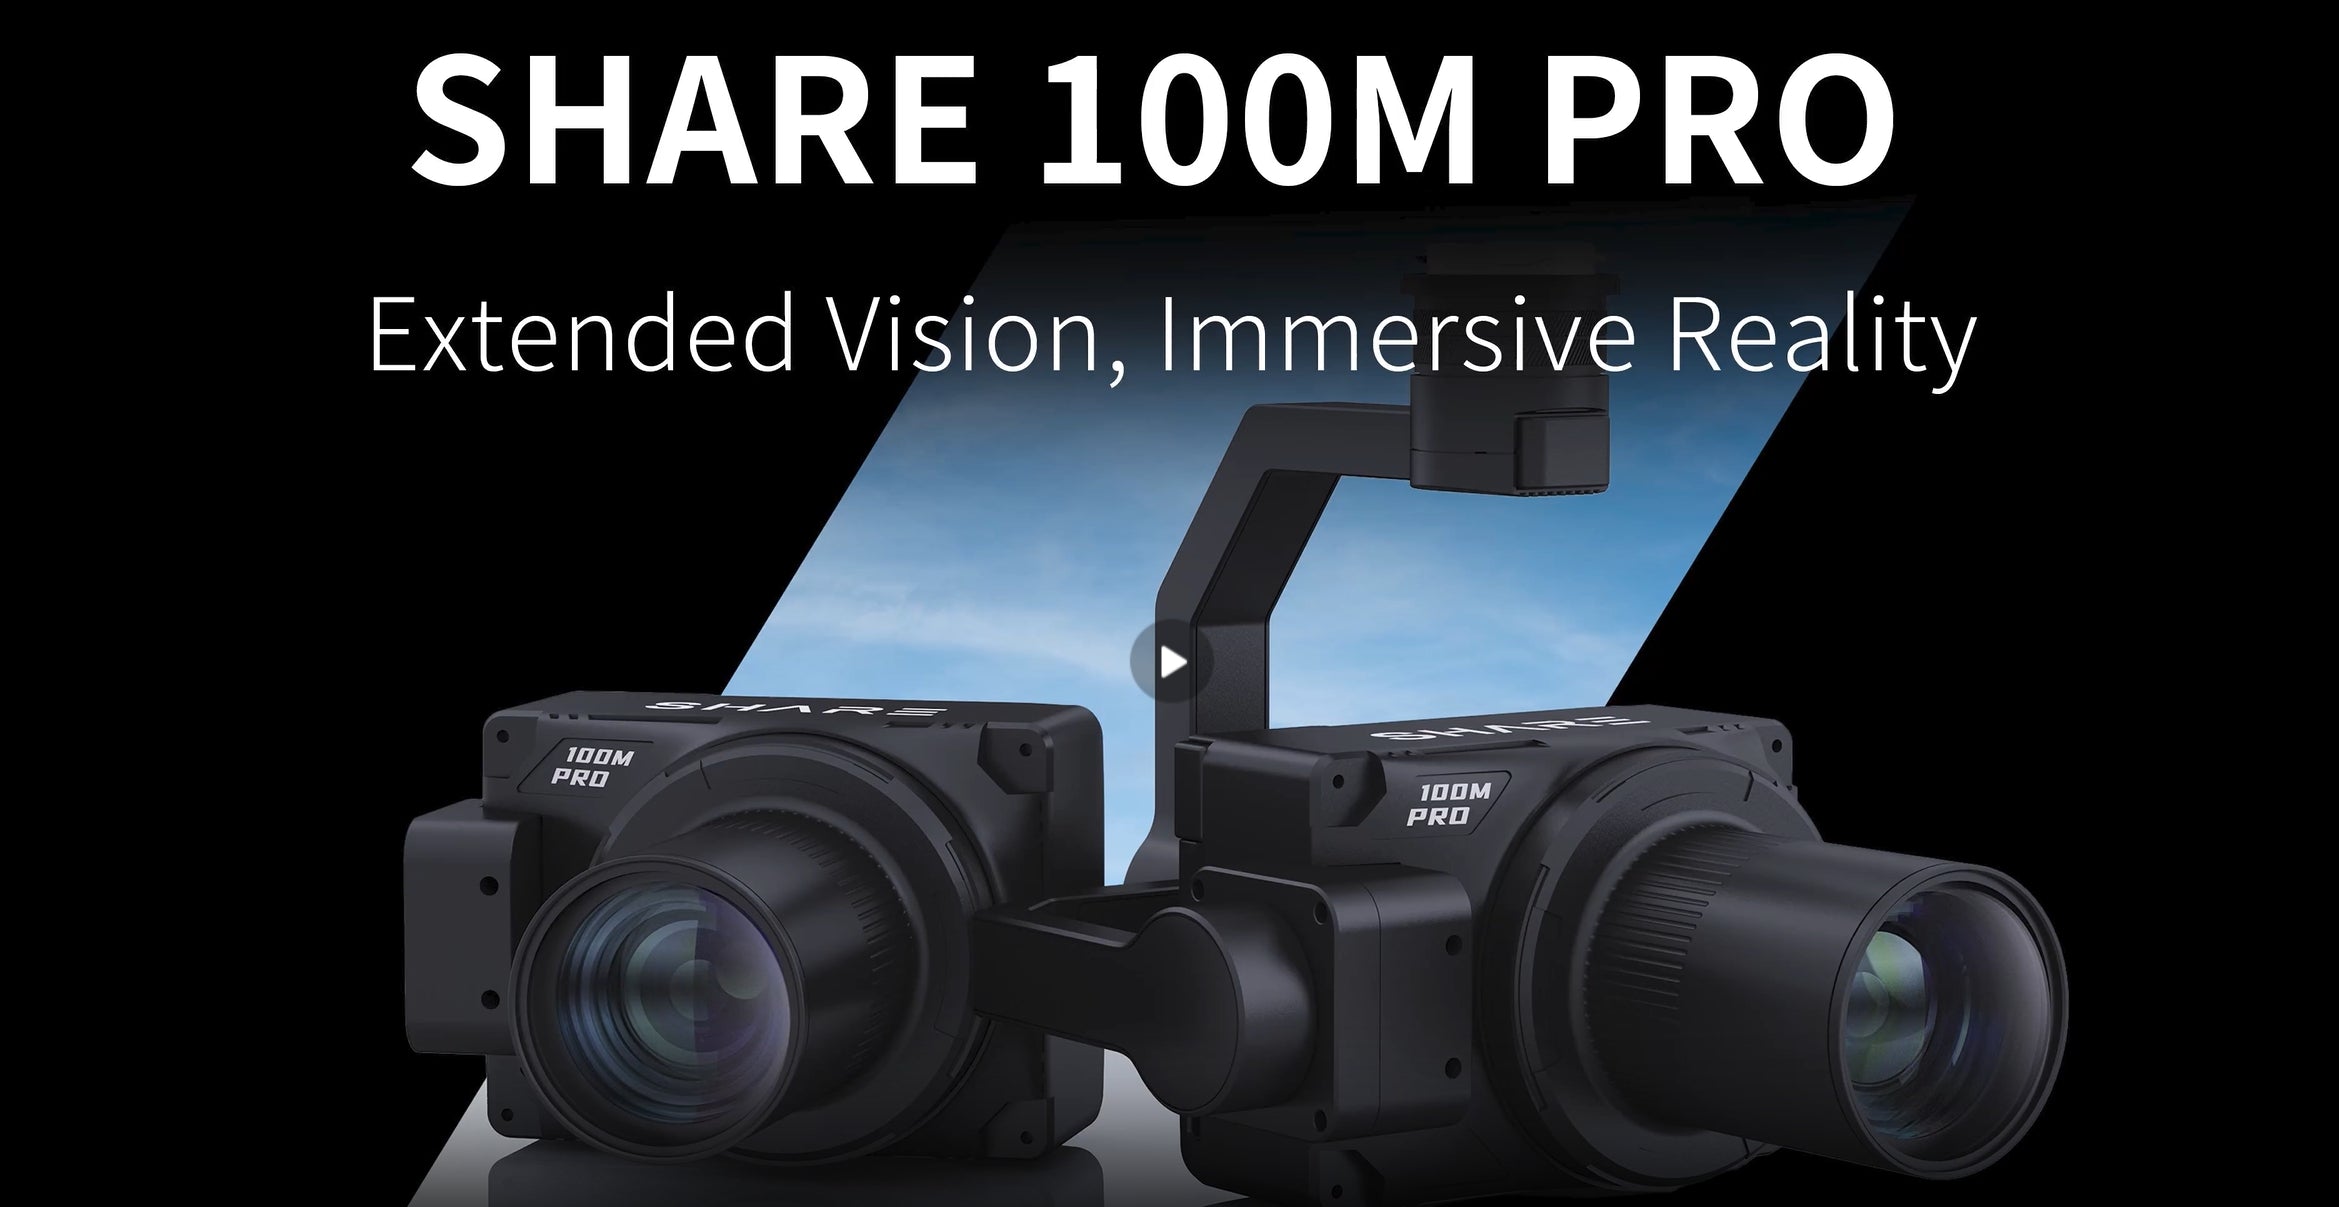 SHARE 100M Pro V2, Immersive reality camera with extended vision for 3D mapping and drone use.